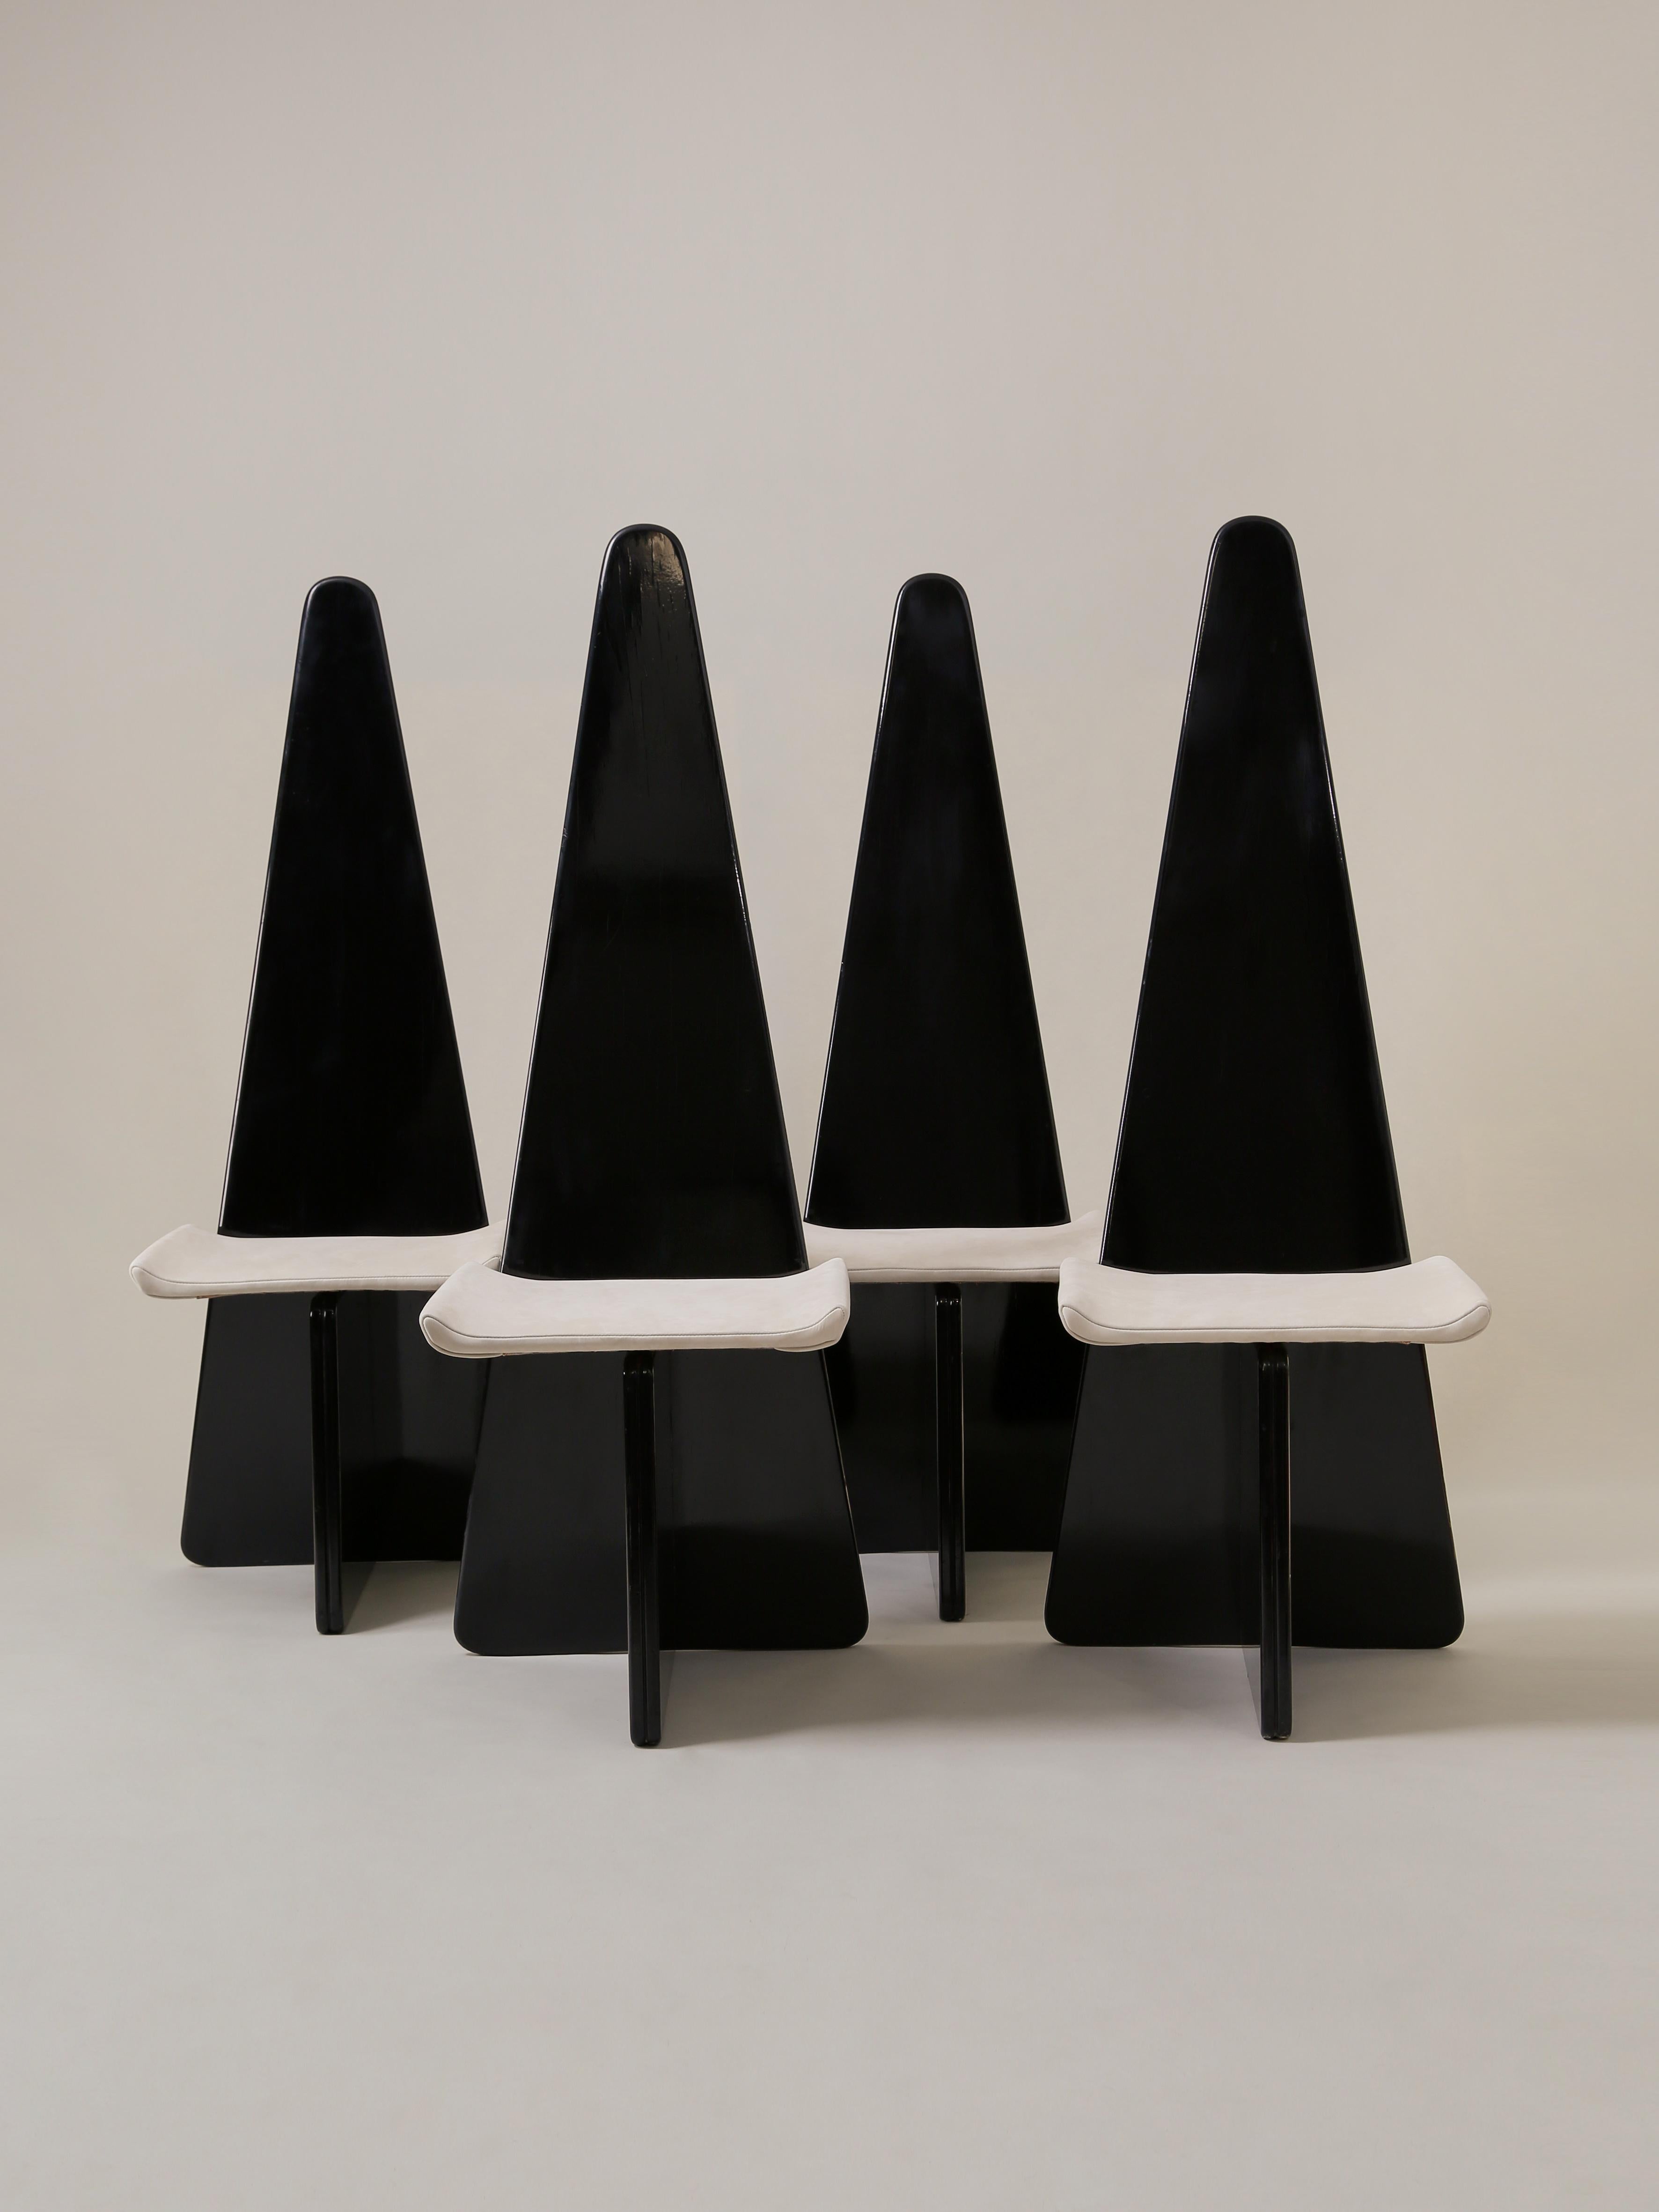 This set of striking modernist chairs, in the style of Claudio Salocchi, features a black-lacquered wood base and a newly reupholstered seat in bone suede. The Sormani Edition chairs, stamped SORMANI, are circa 1970s Italy.

Measures: overall